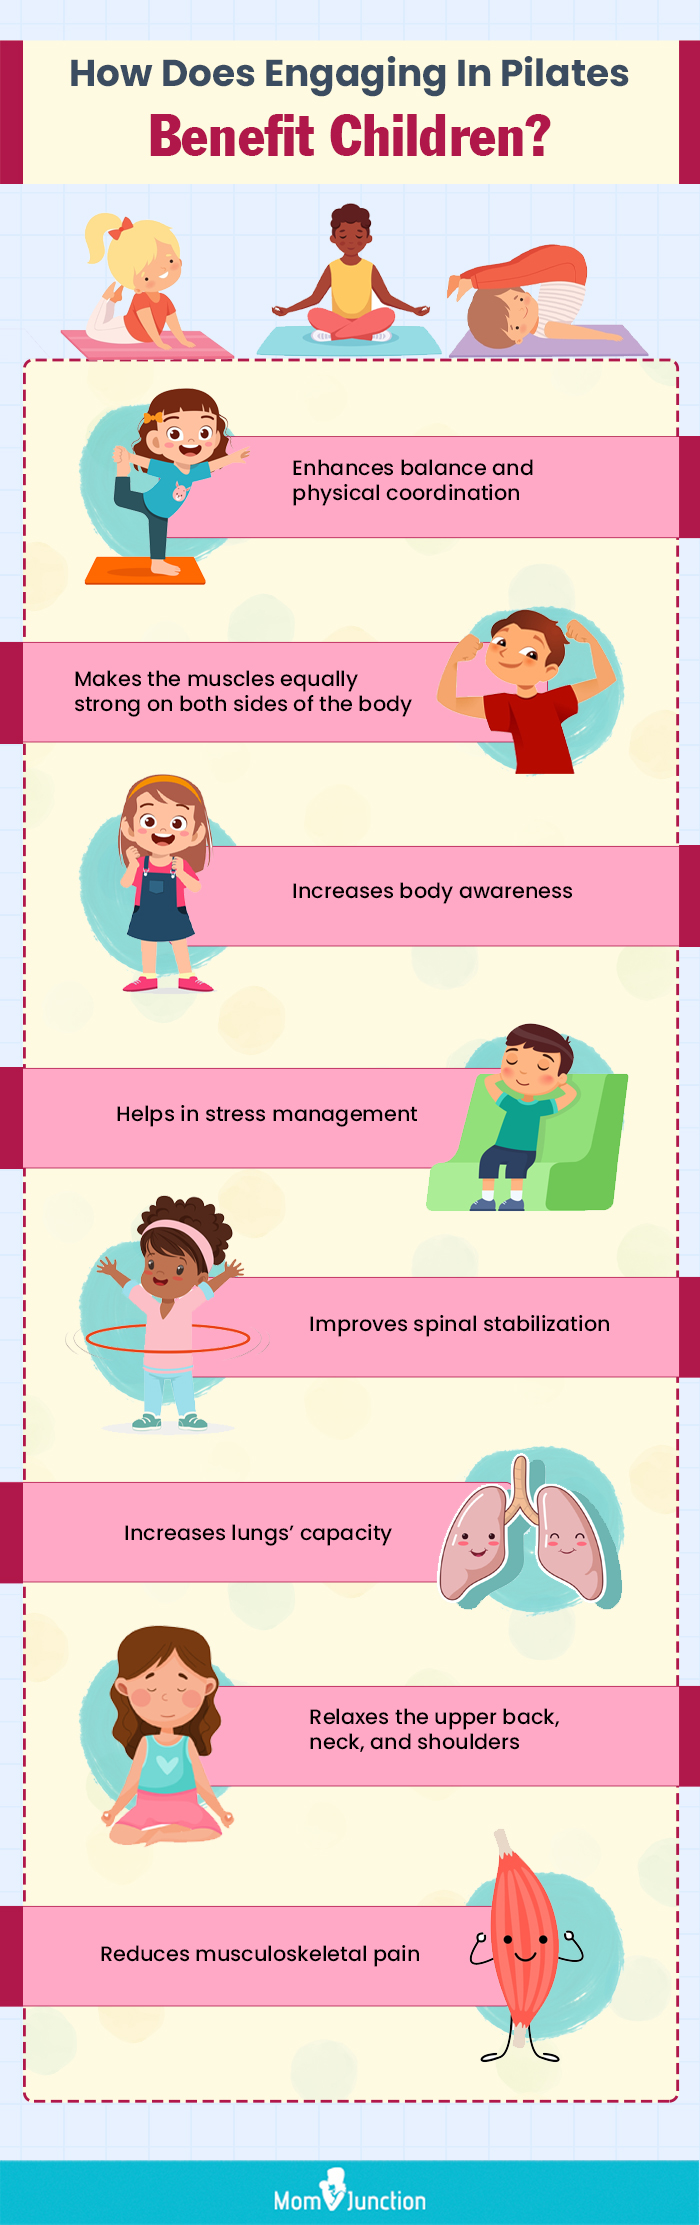 bhow does engaging in pilates benefit children (infographic) 